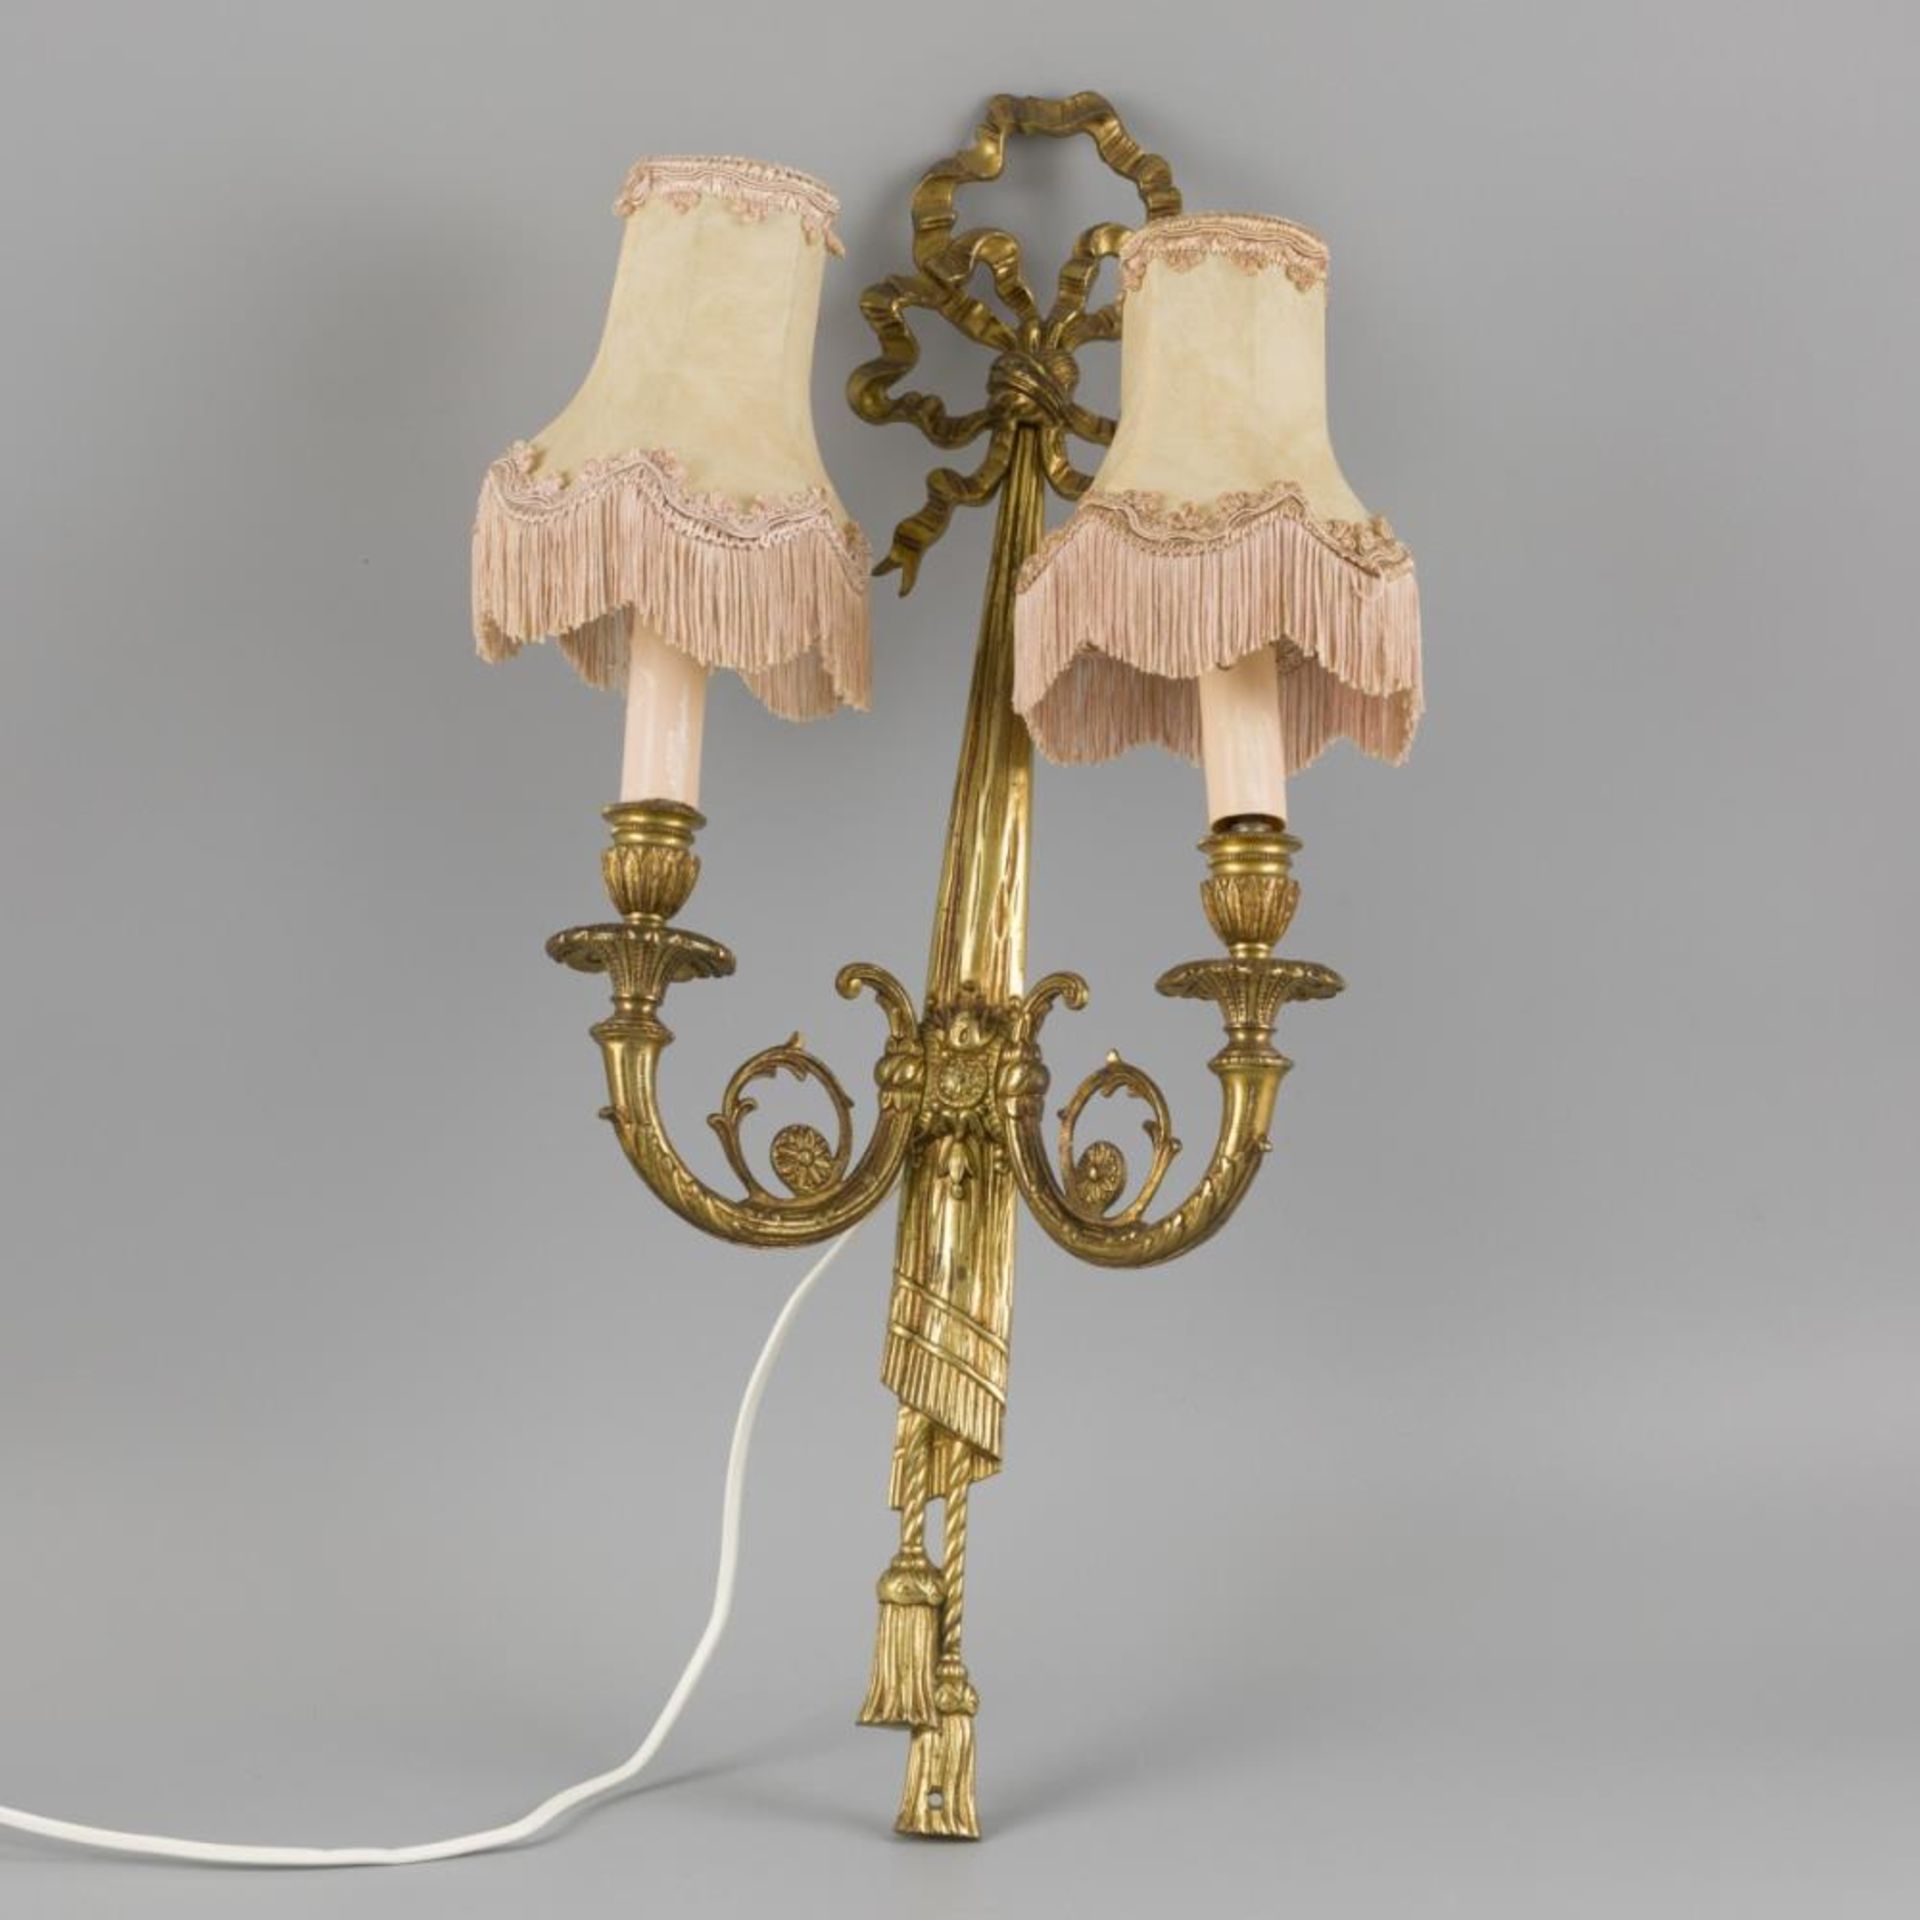 A two-light wall lamp / sconce in Louis XVI-style, brass, France, 20th century.